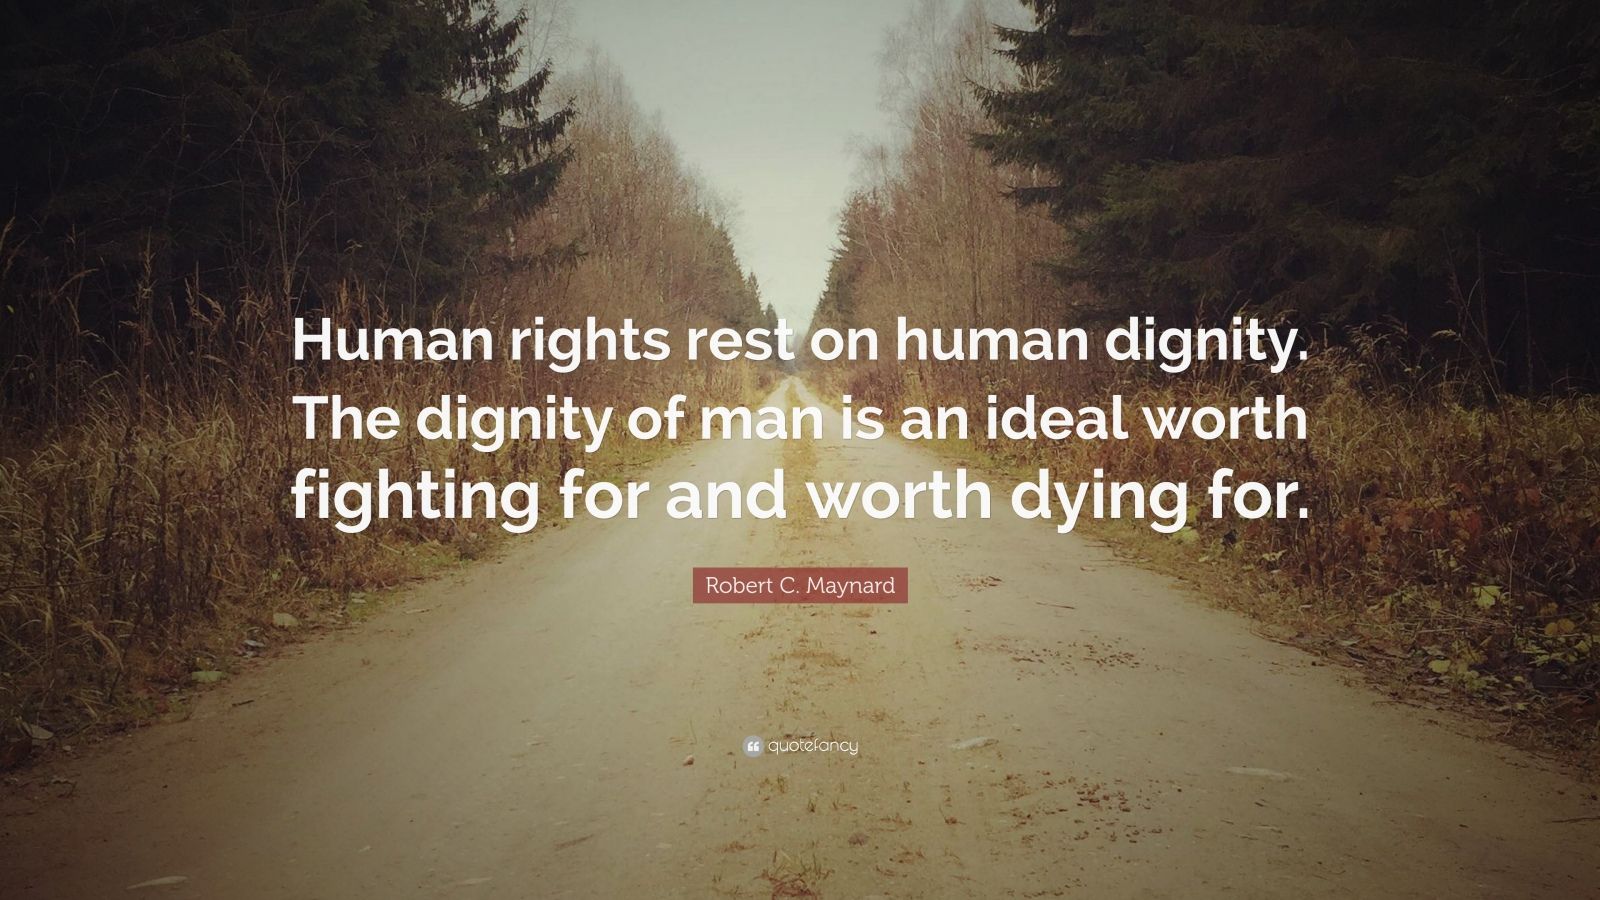 Robert C. Maynard Quote: “Human rights rest on human dignity. The